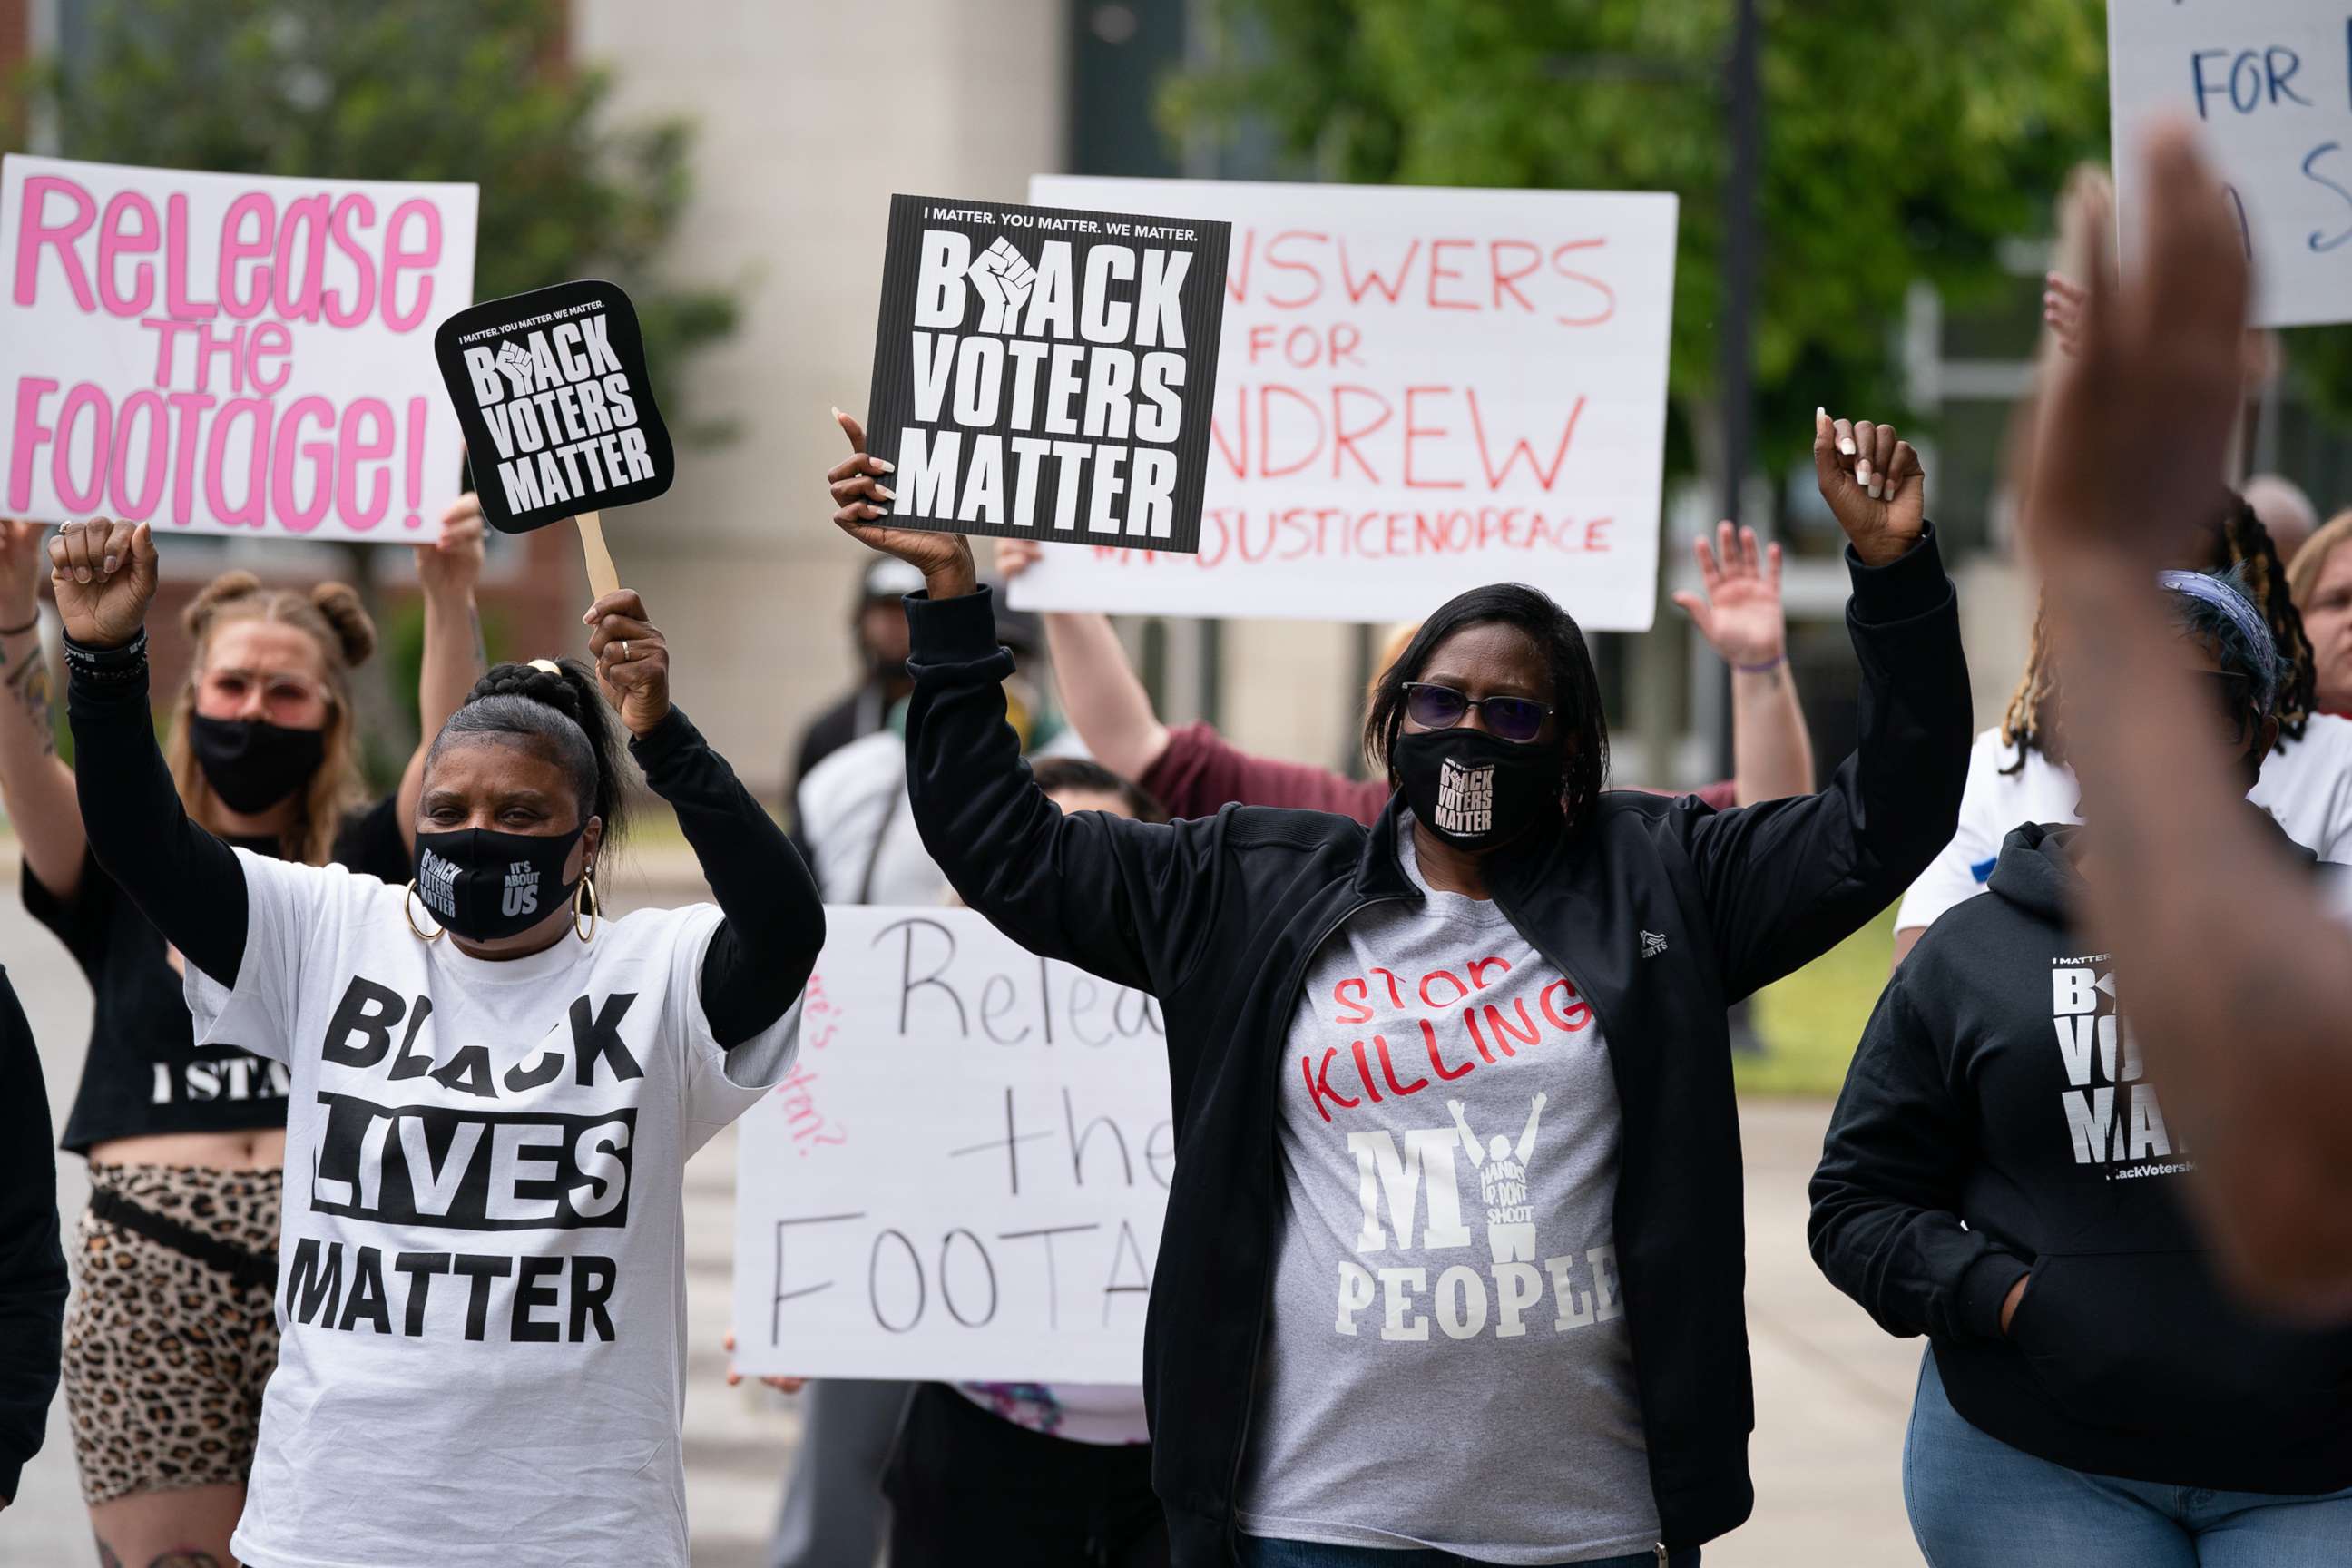 PHOTO: Demonstrators hold signs during a protest march, April 24, 2021, in Elizabeth City, N.C., calling for the release of body camera footage from the shooting death of Andrew Brown Jr., 3 days prior.